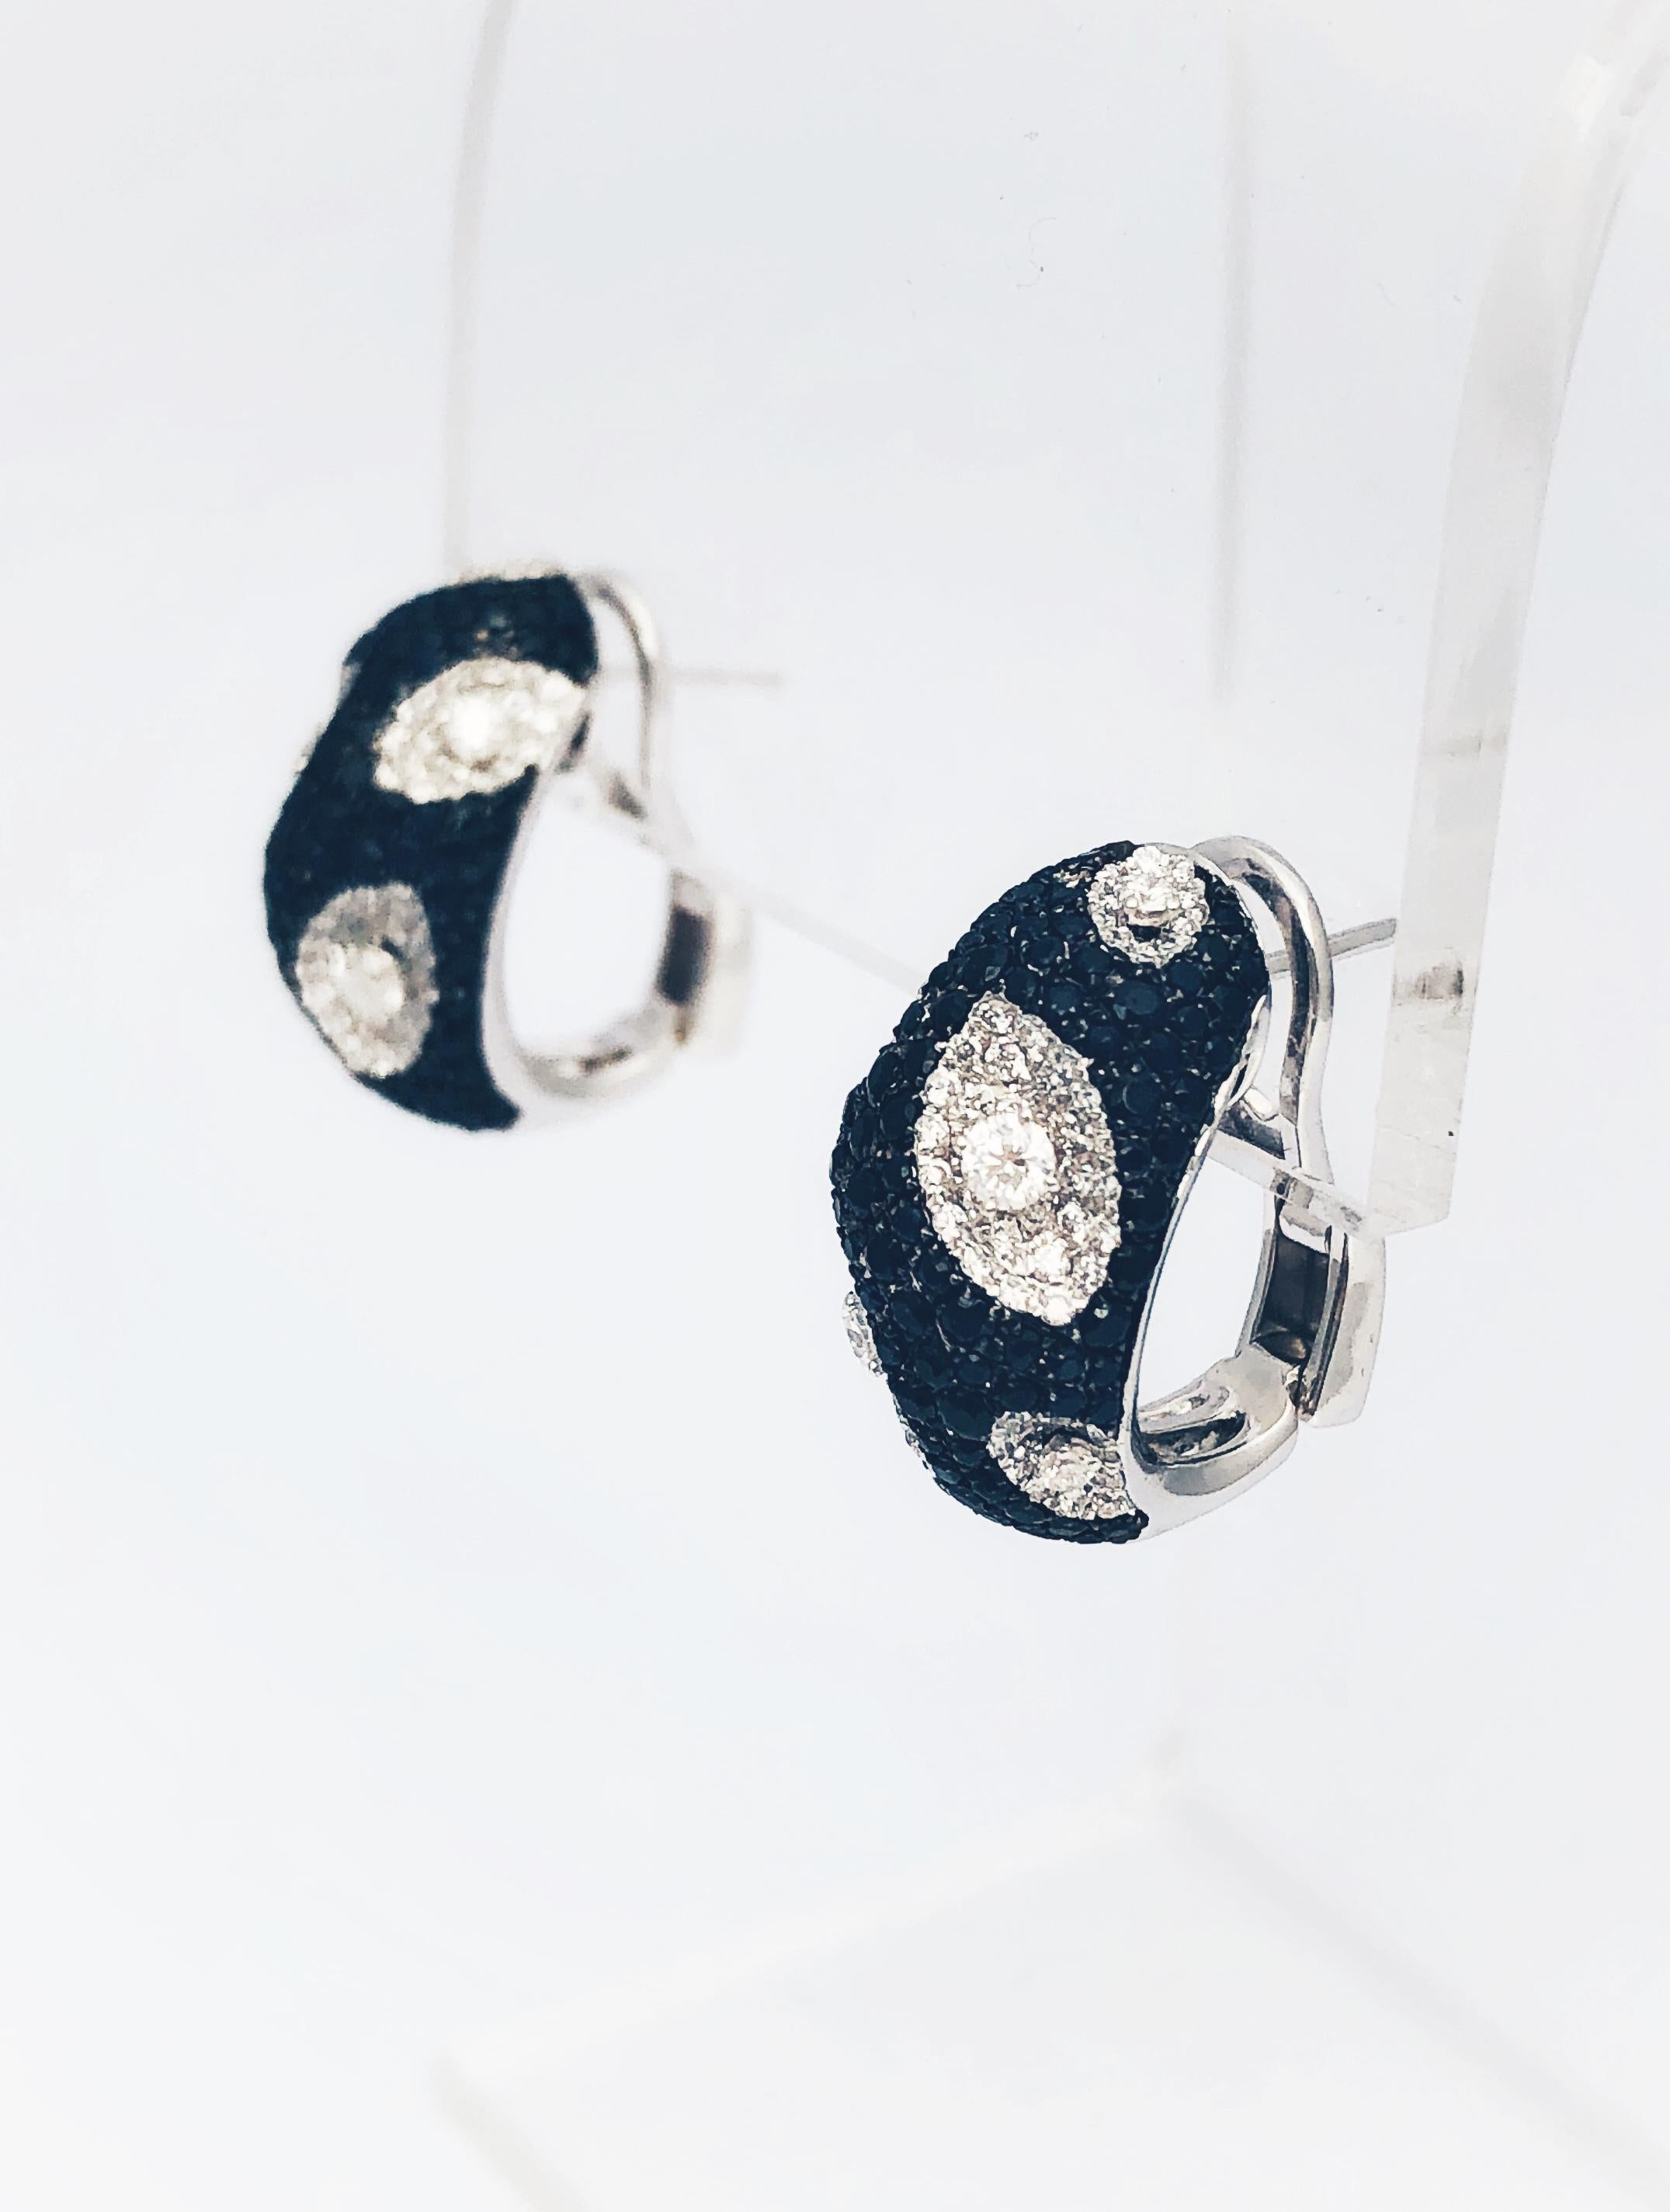 Gorgeous Roberto Coin Diamond and Black Sapphire Huggie earrings. The retail price on this pair is $7300. This pair boasts approximately 1.30 total carat weight of beautiful, pave set,  white diamonds and approximately 2.41 carats of pave set, black